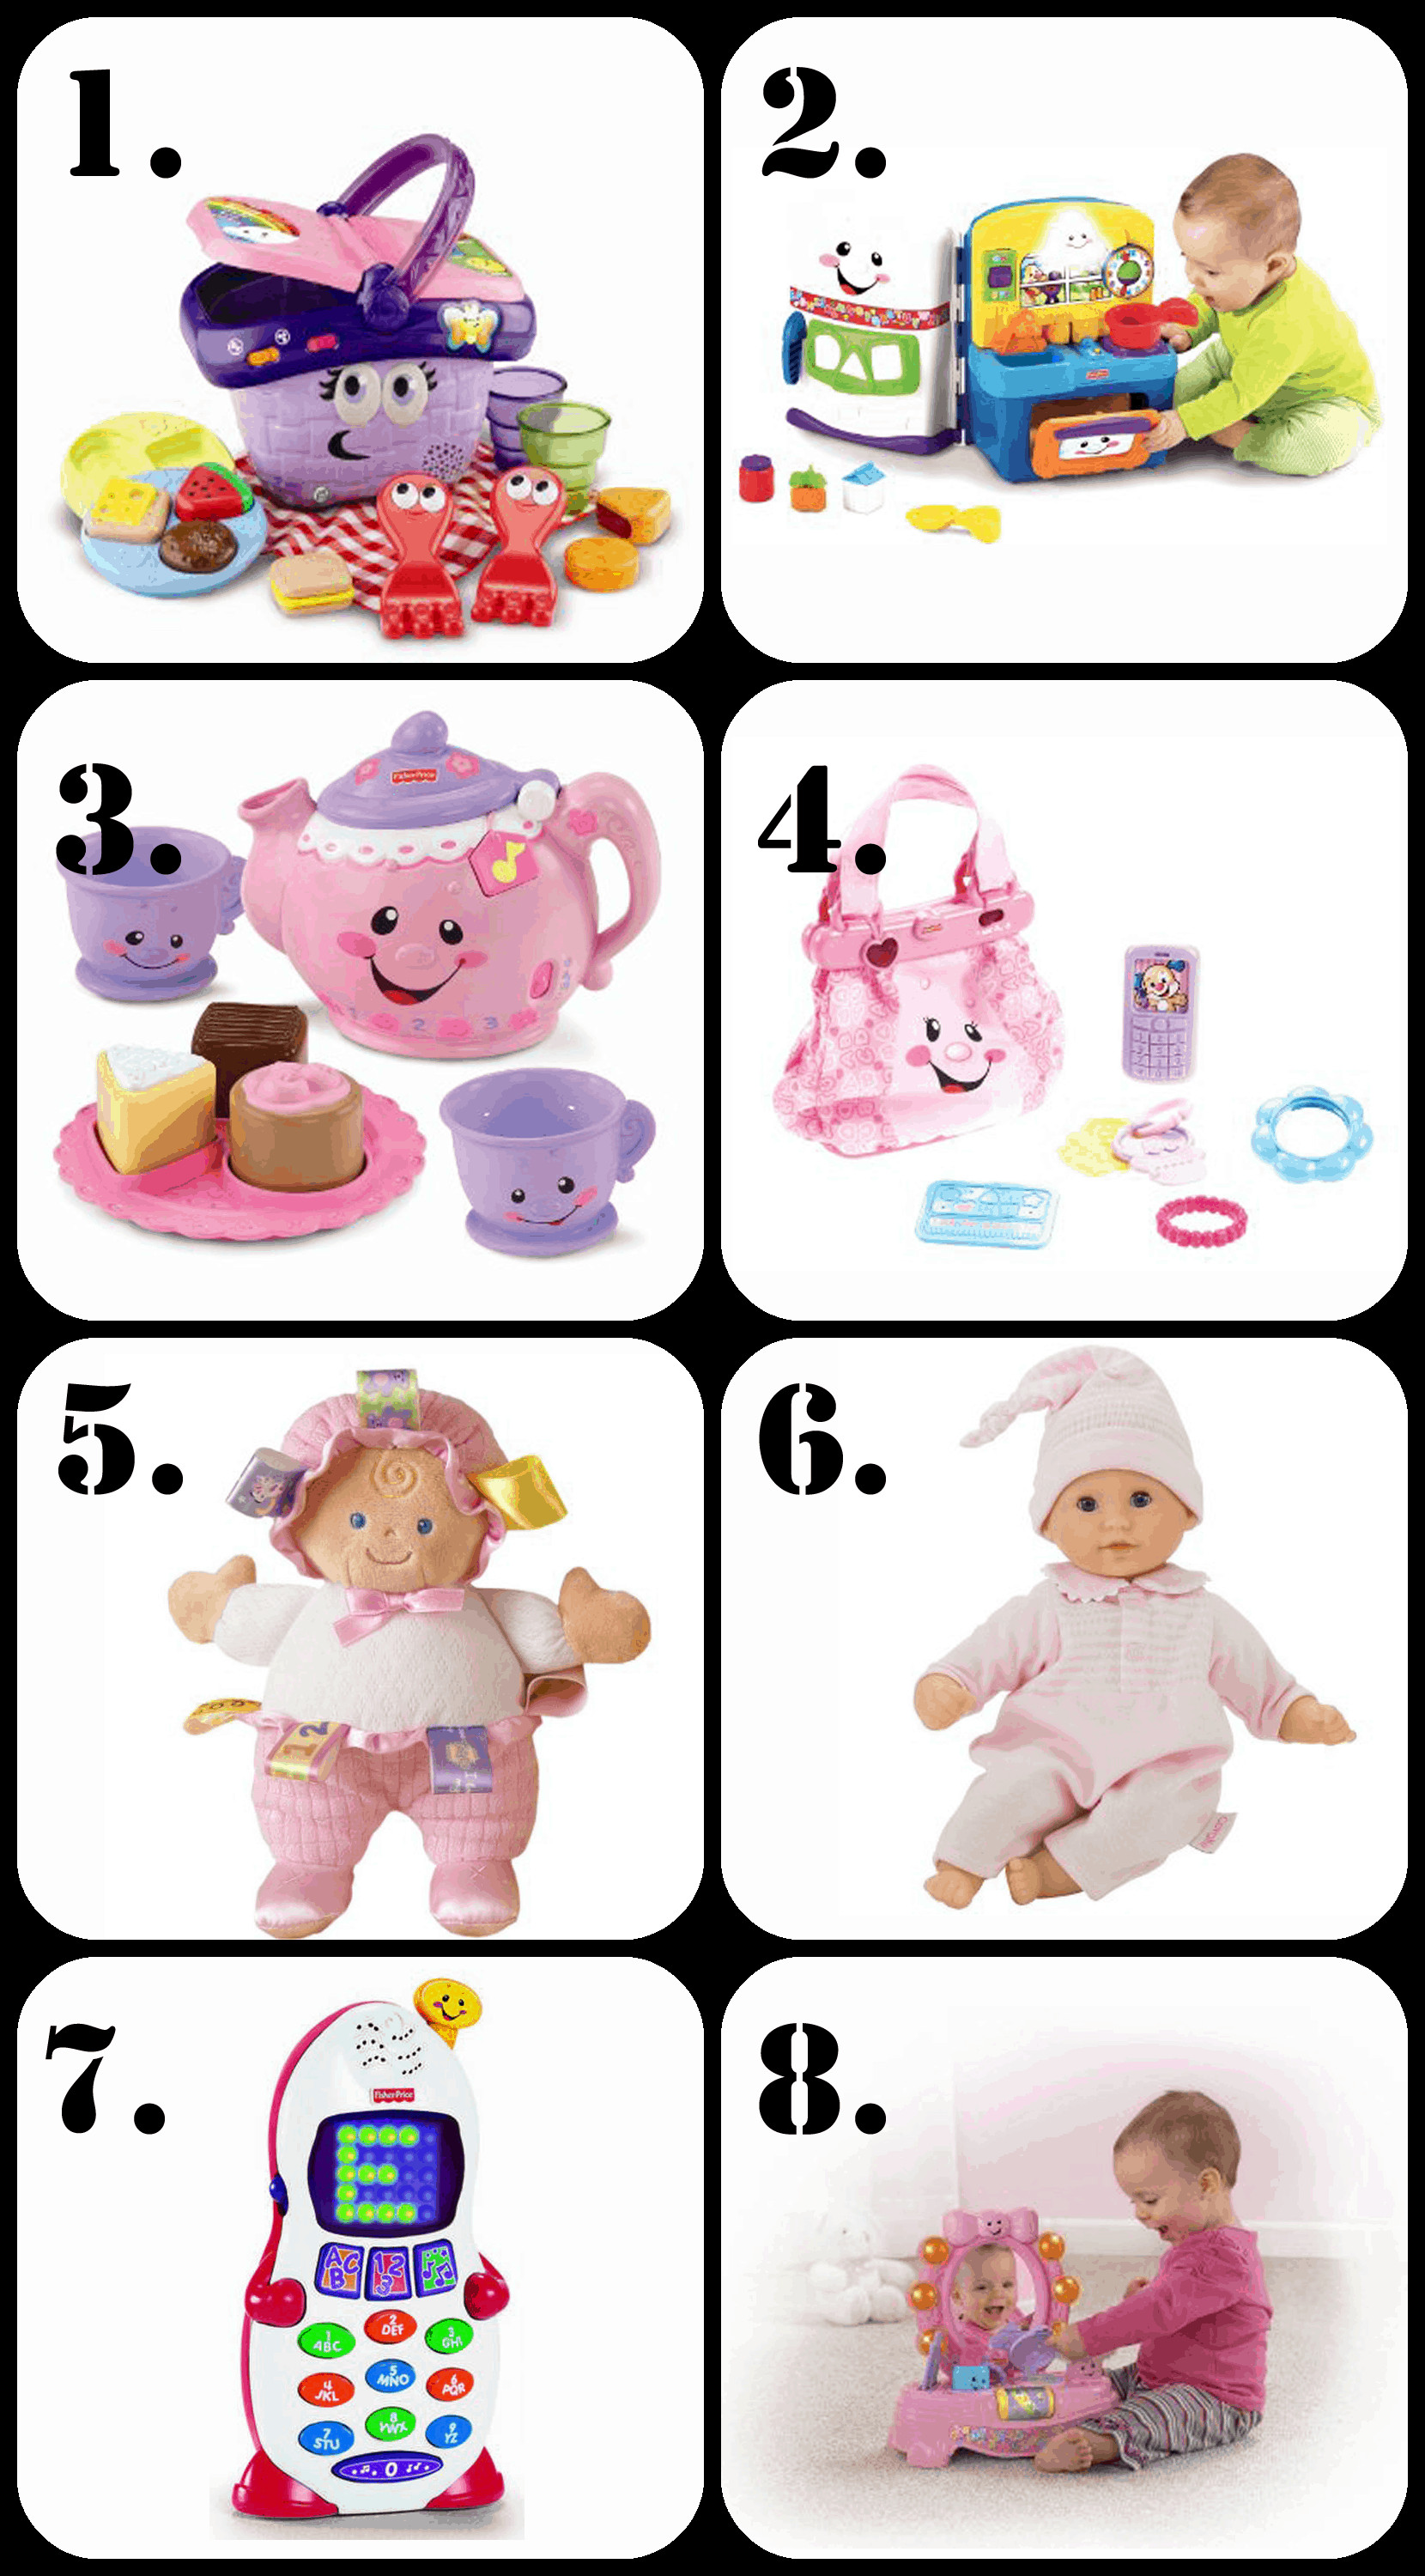 Christmas Gift Ideas For One Year Old
 The Ultimate List of Gift Ideas for a 1 Year Old Girl